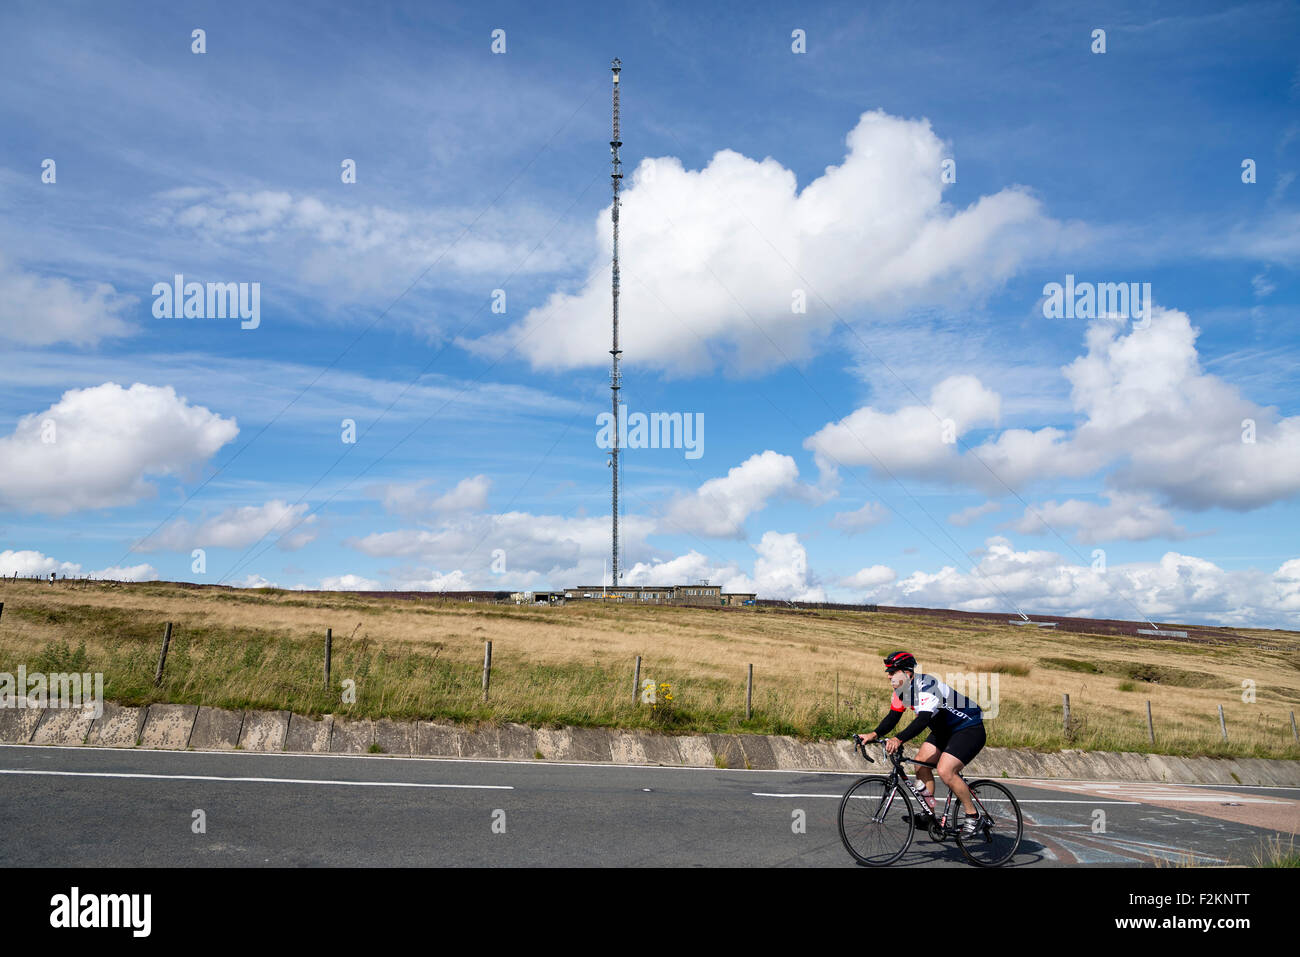 The Holme Moss television transmitter aerial at Holme Moss known as the big tower in West Yorkshire the pennines. North West Eng Stock Photo